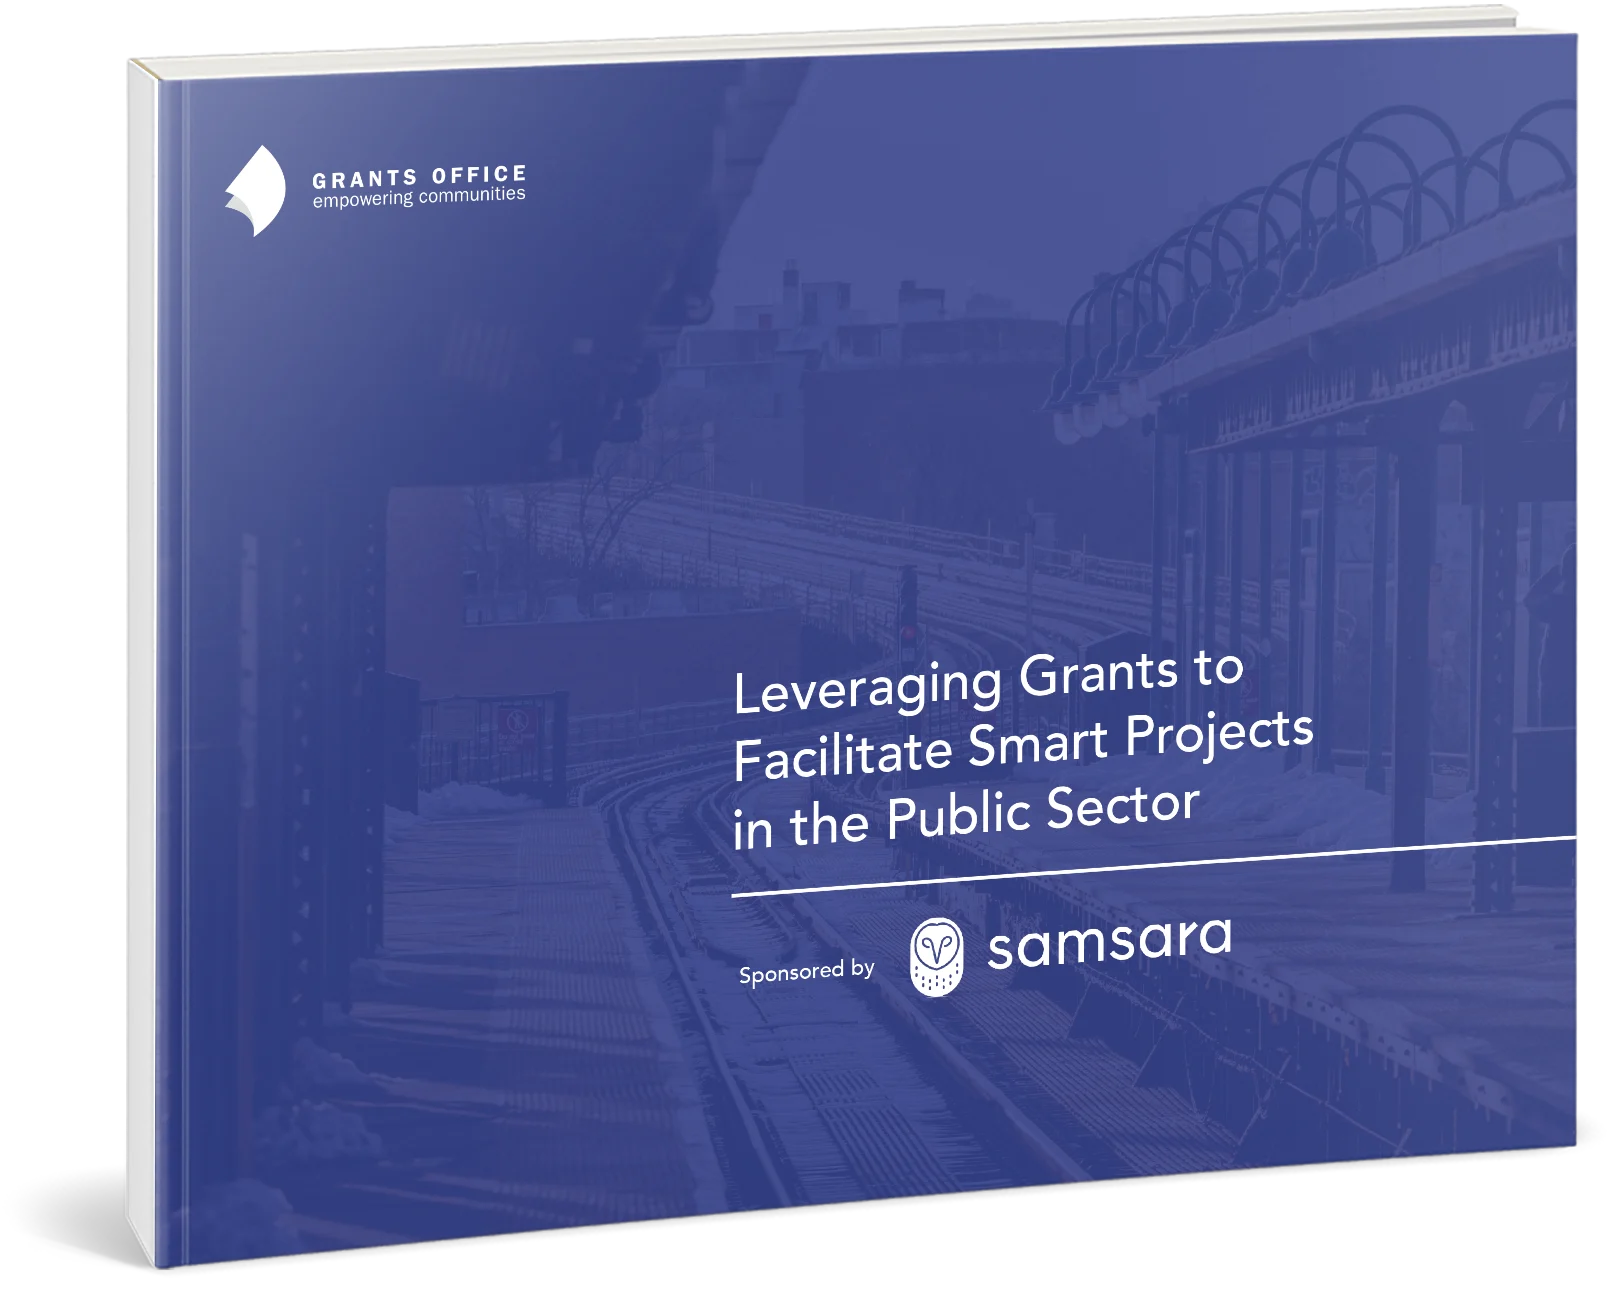 Leveraging Grants to Facilitate Smart Projects in the Public Sector